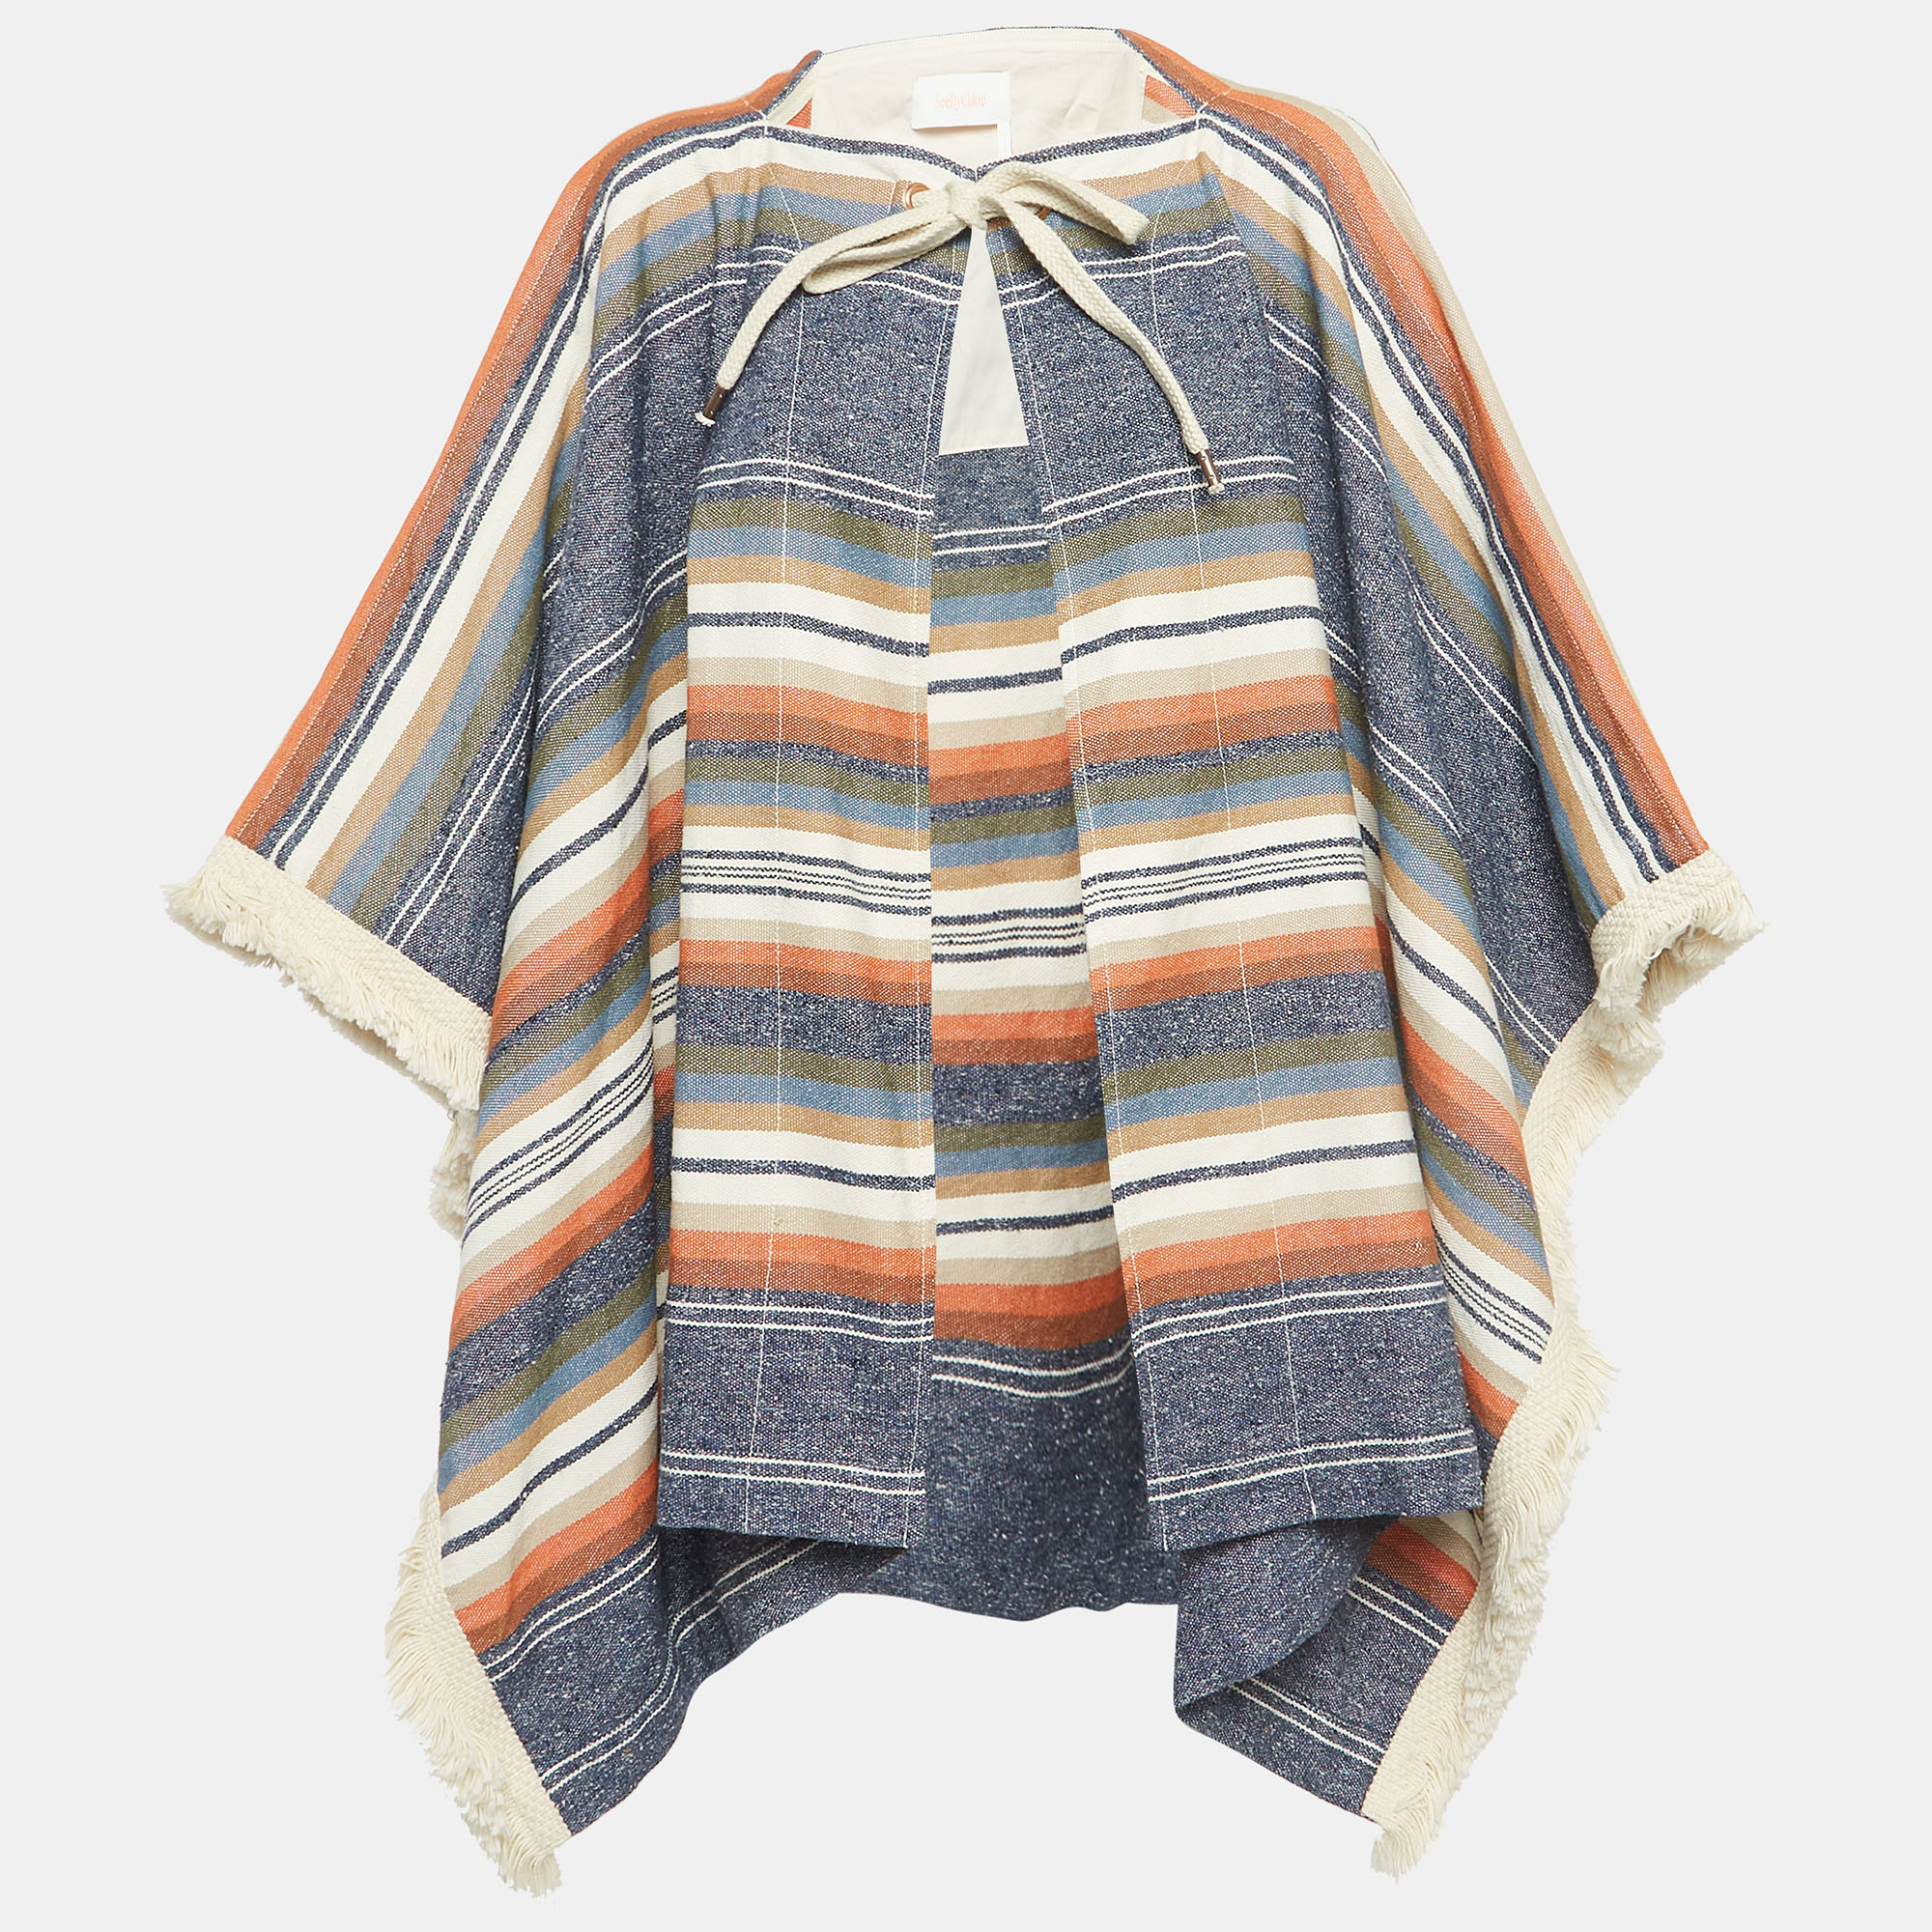 Let the latest addition to your closet be this See by Chloe poncho for women. Meticulously tailored and effortlessly chic its a versatile wardrobe staple perfect to pair with dresses or over a T shirt and jeans.